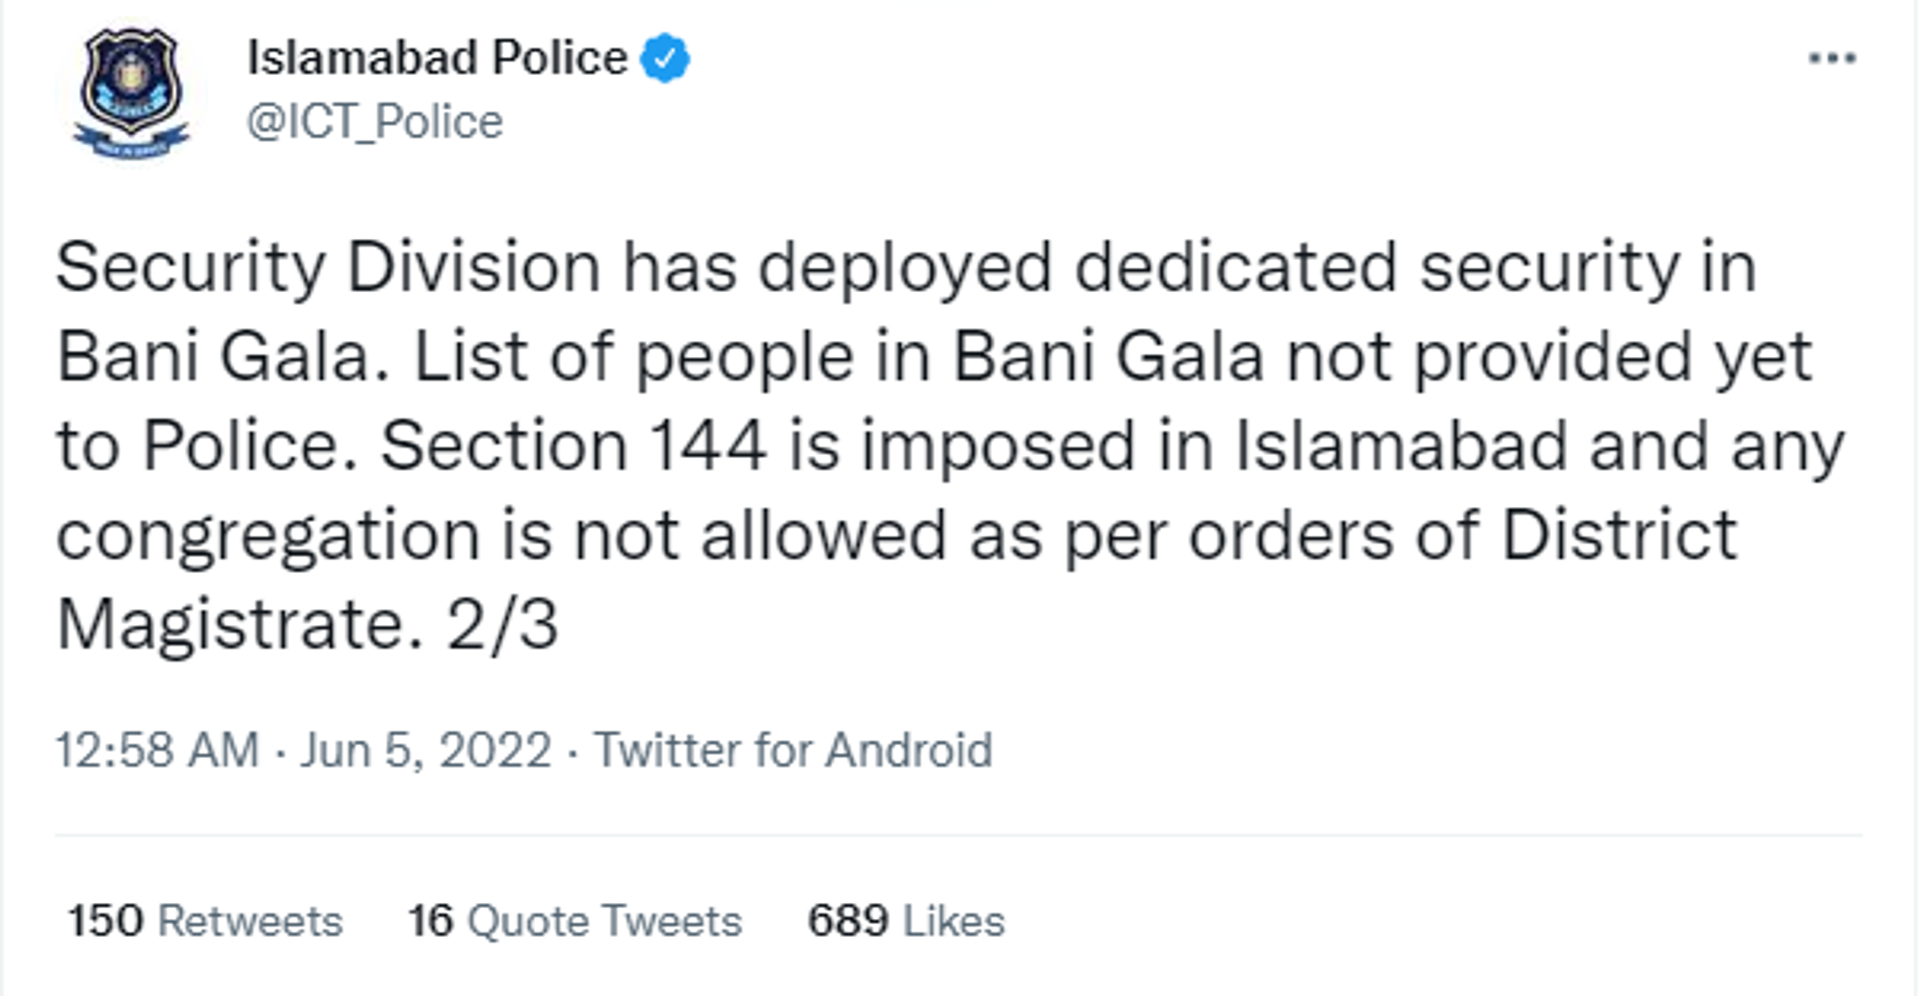 Section 144 Imposed in Islamabad and No Gatherings are Allowed - Sputnik International, 1920, 05.06.2022